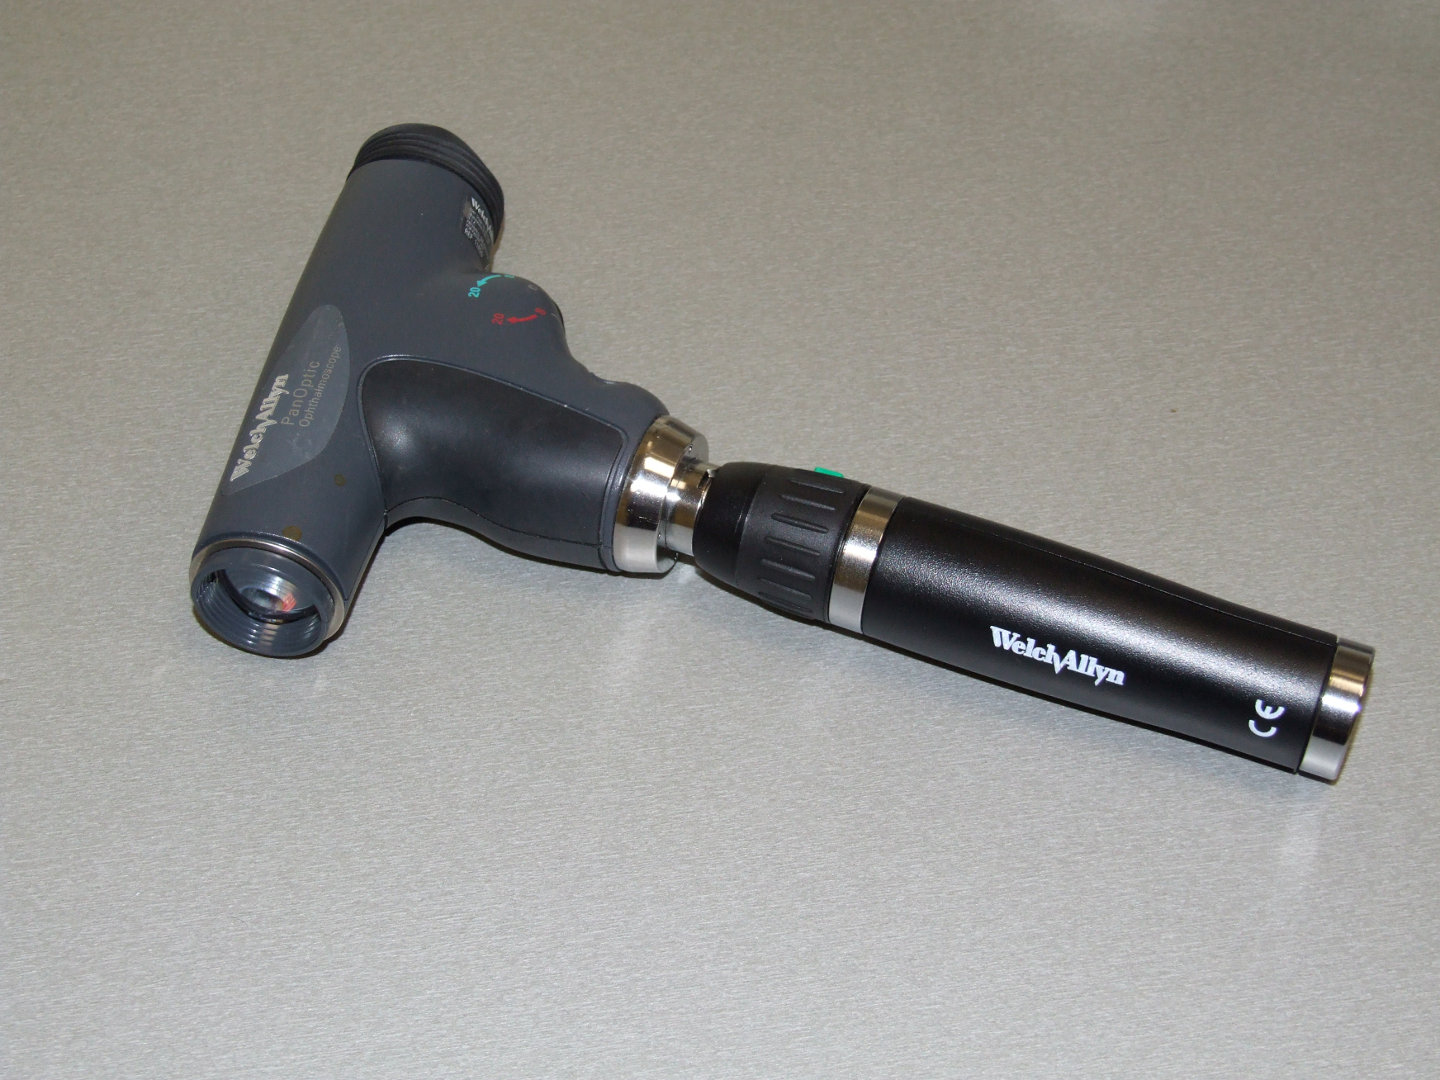 Monocular Ophthalmoscope